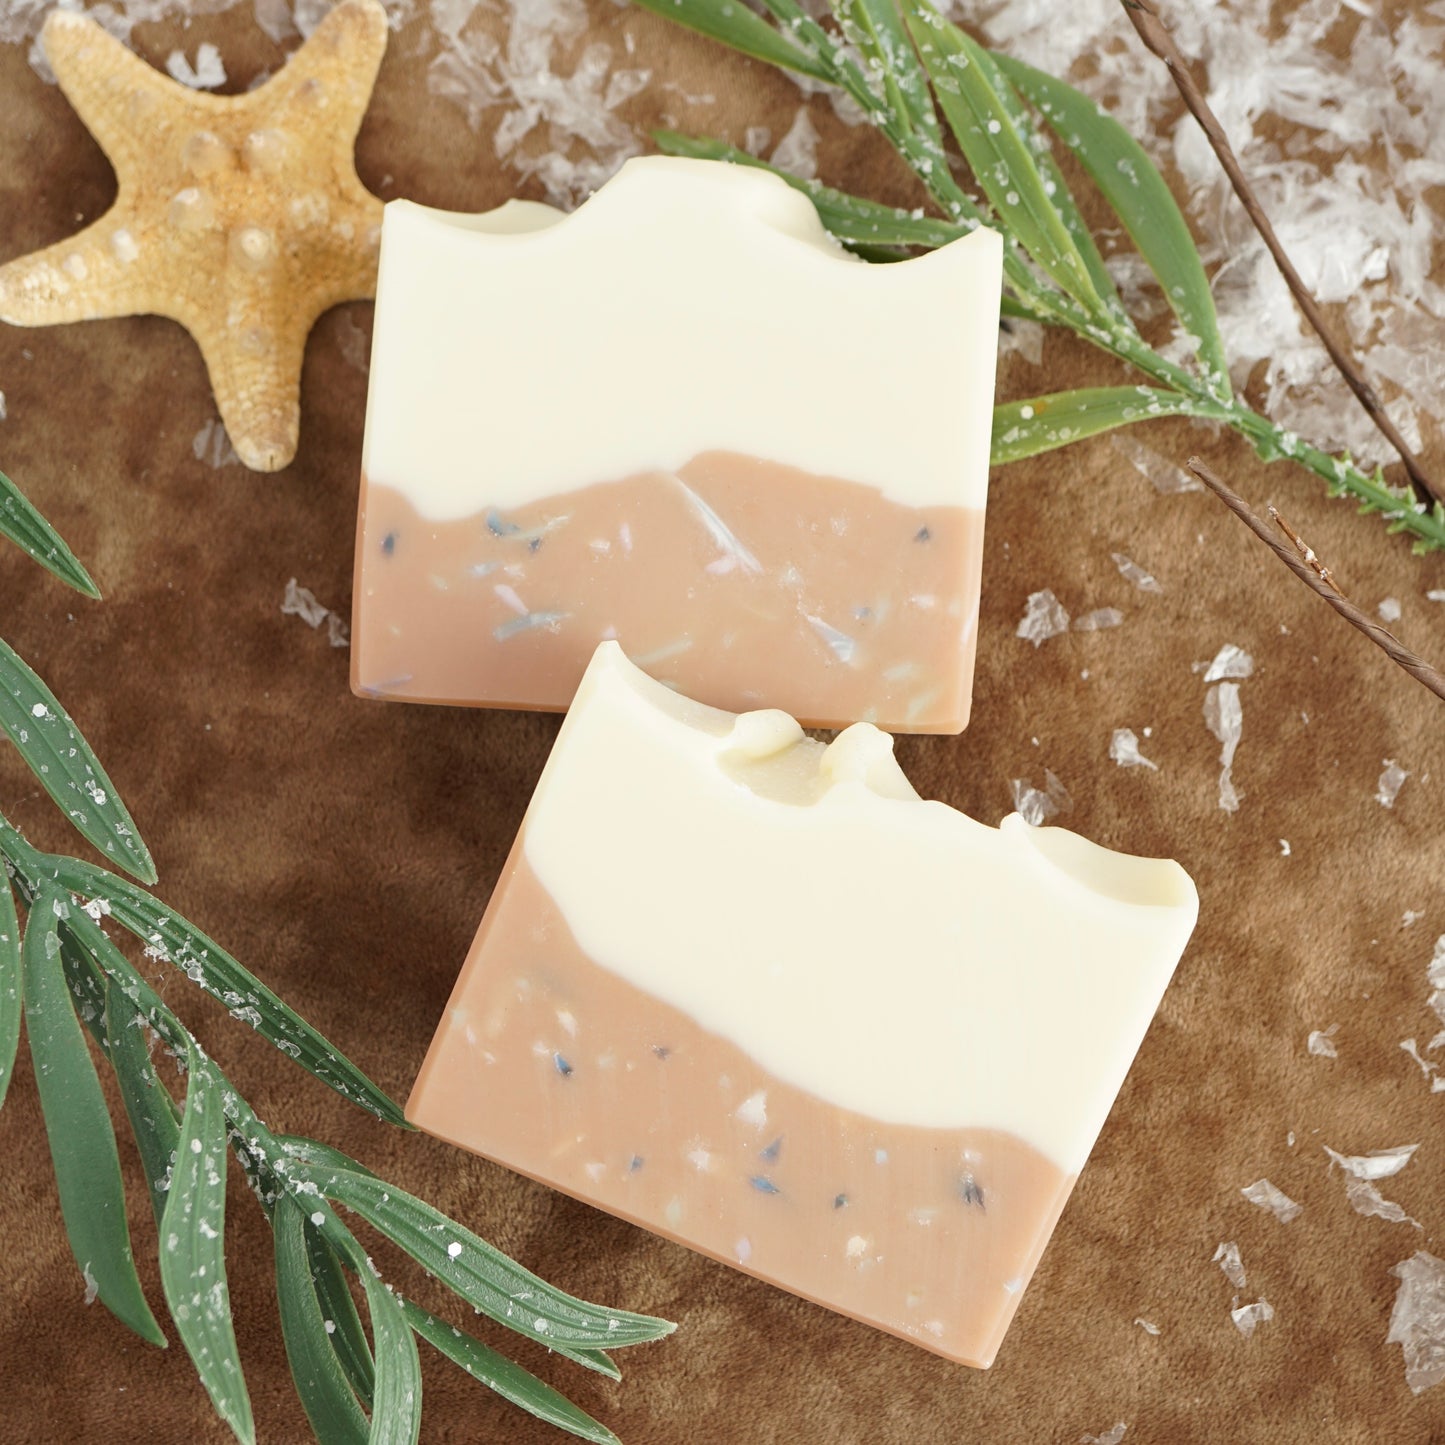 Snow on the Beach Cold Process Soap - NEW Holiday Scent - Frosted Eucalyptus, Sea Salt, Cool Mint